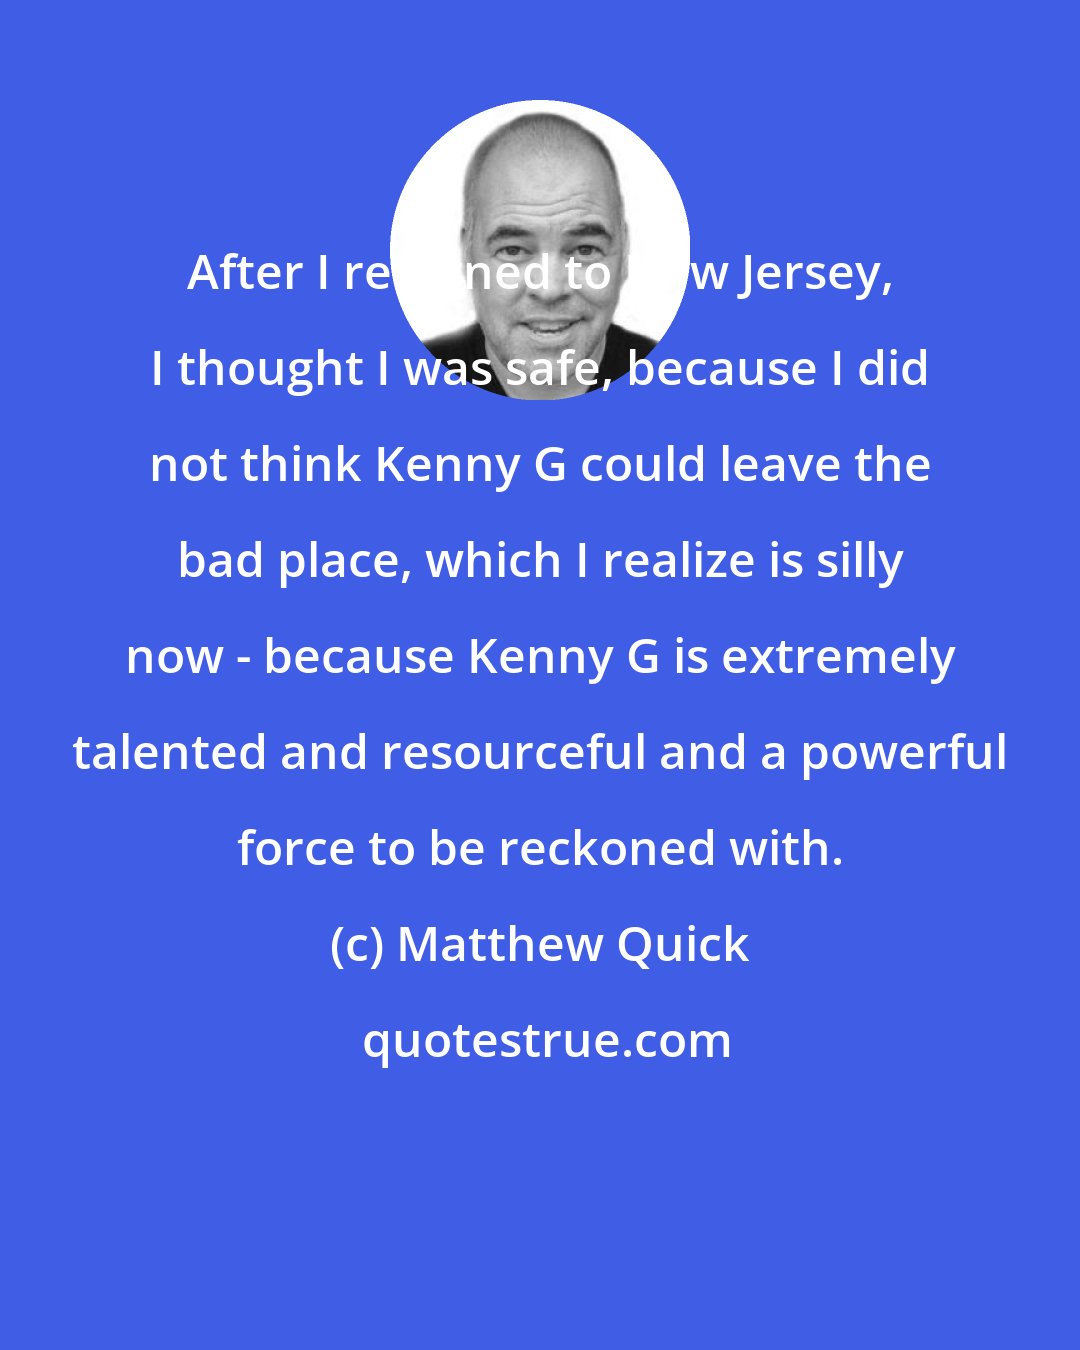 Matthew Quick: After I returned to New Jersey, I thought I was safe, because I did not think Kenny G could leave the bad place, which I realize is silly now - because Kenny G is extremely talented and resourceful and a powerful force to be reckoned with.